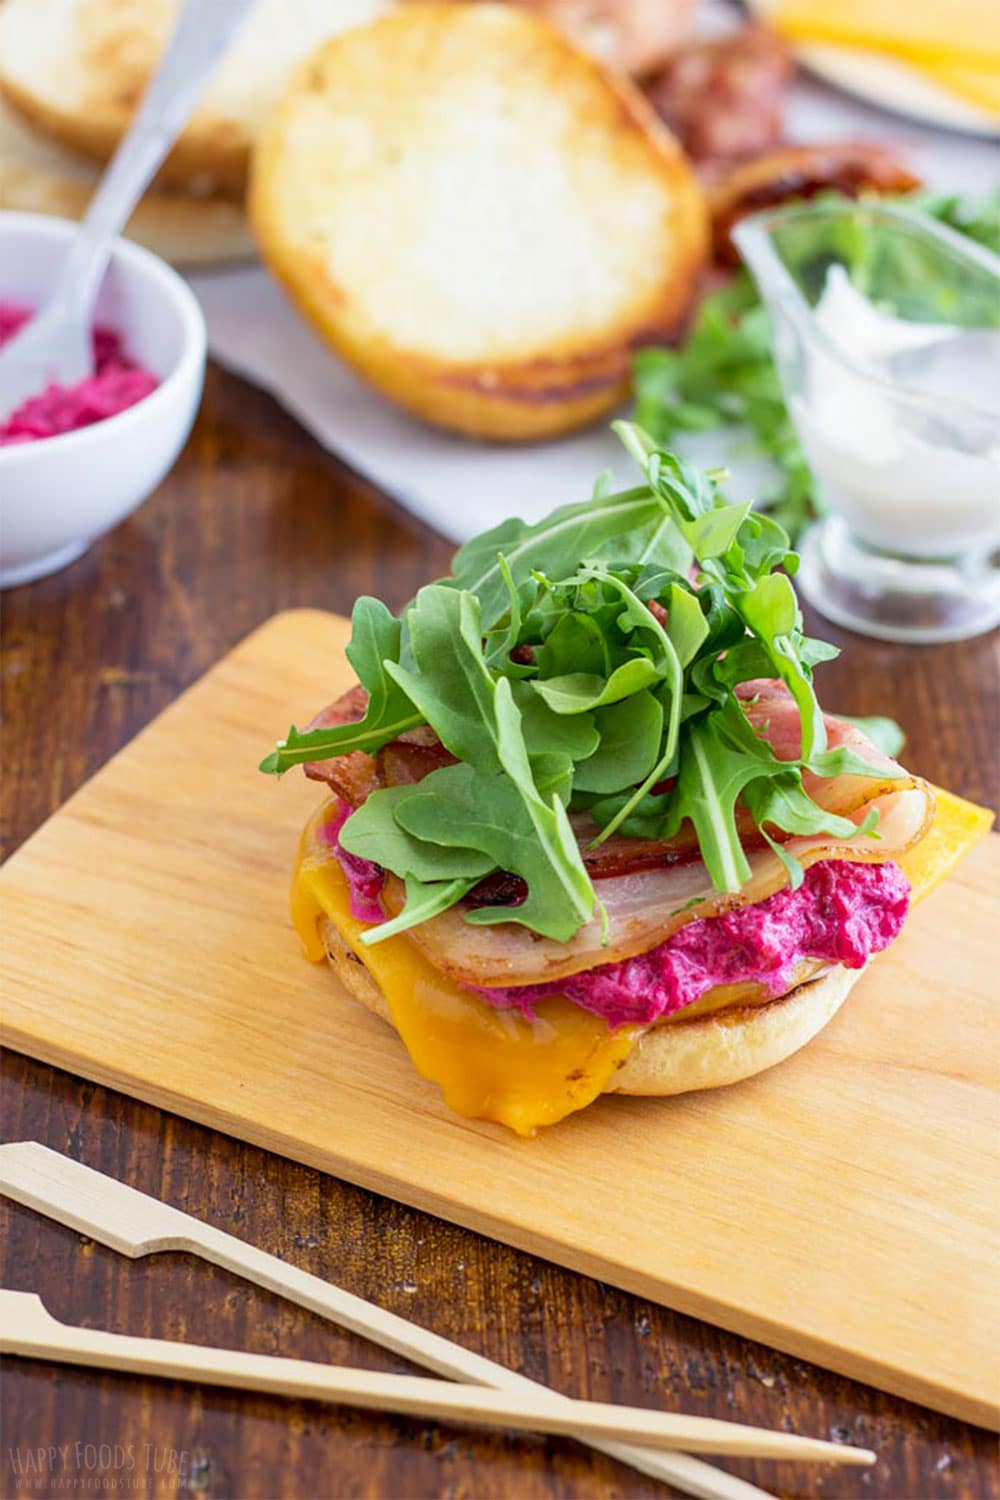 Ground chicken burger with bacon and beet mayonnaise.